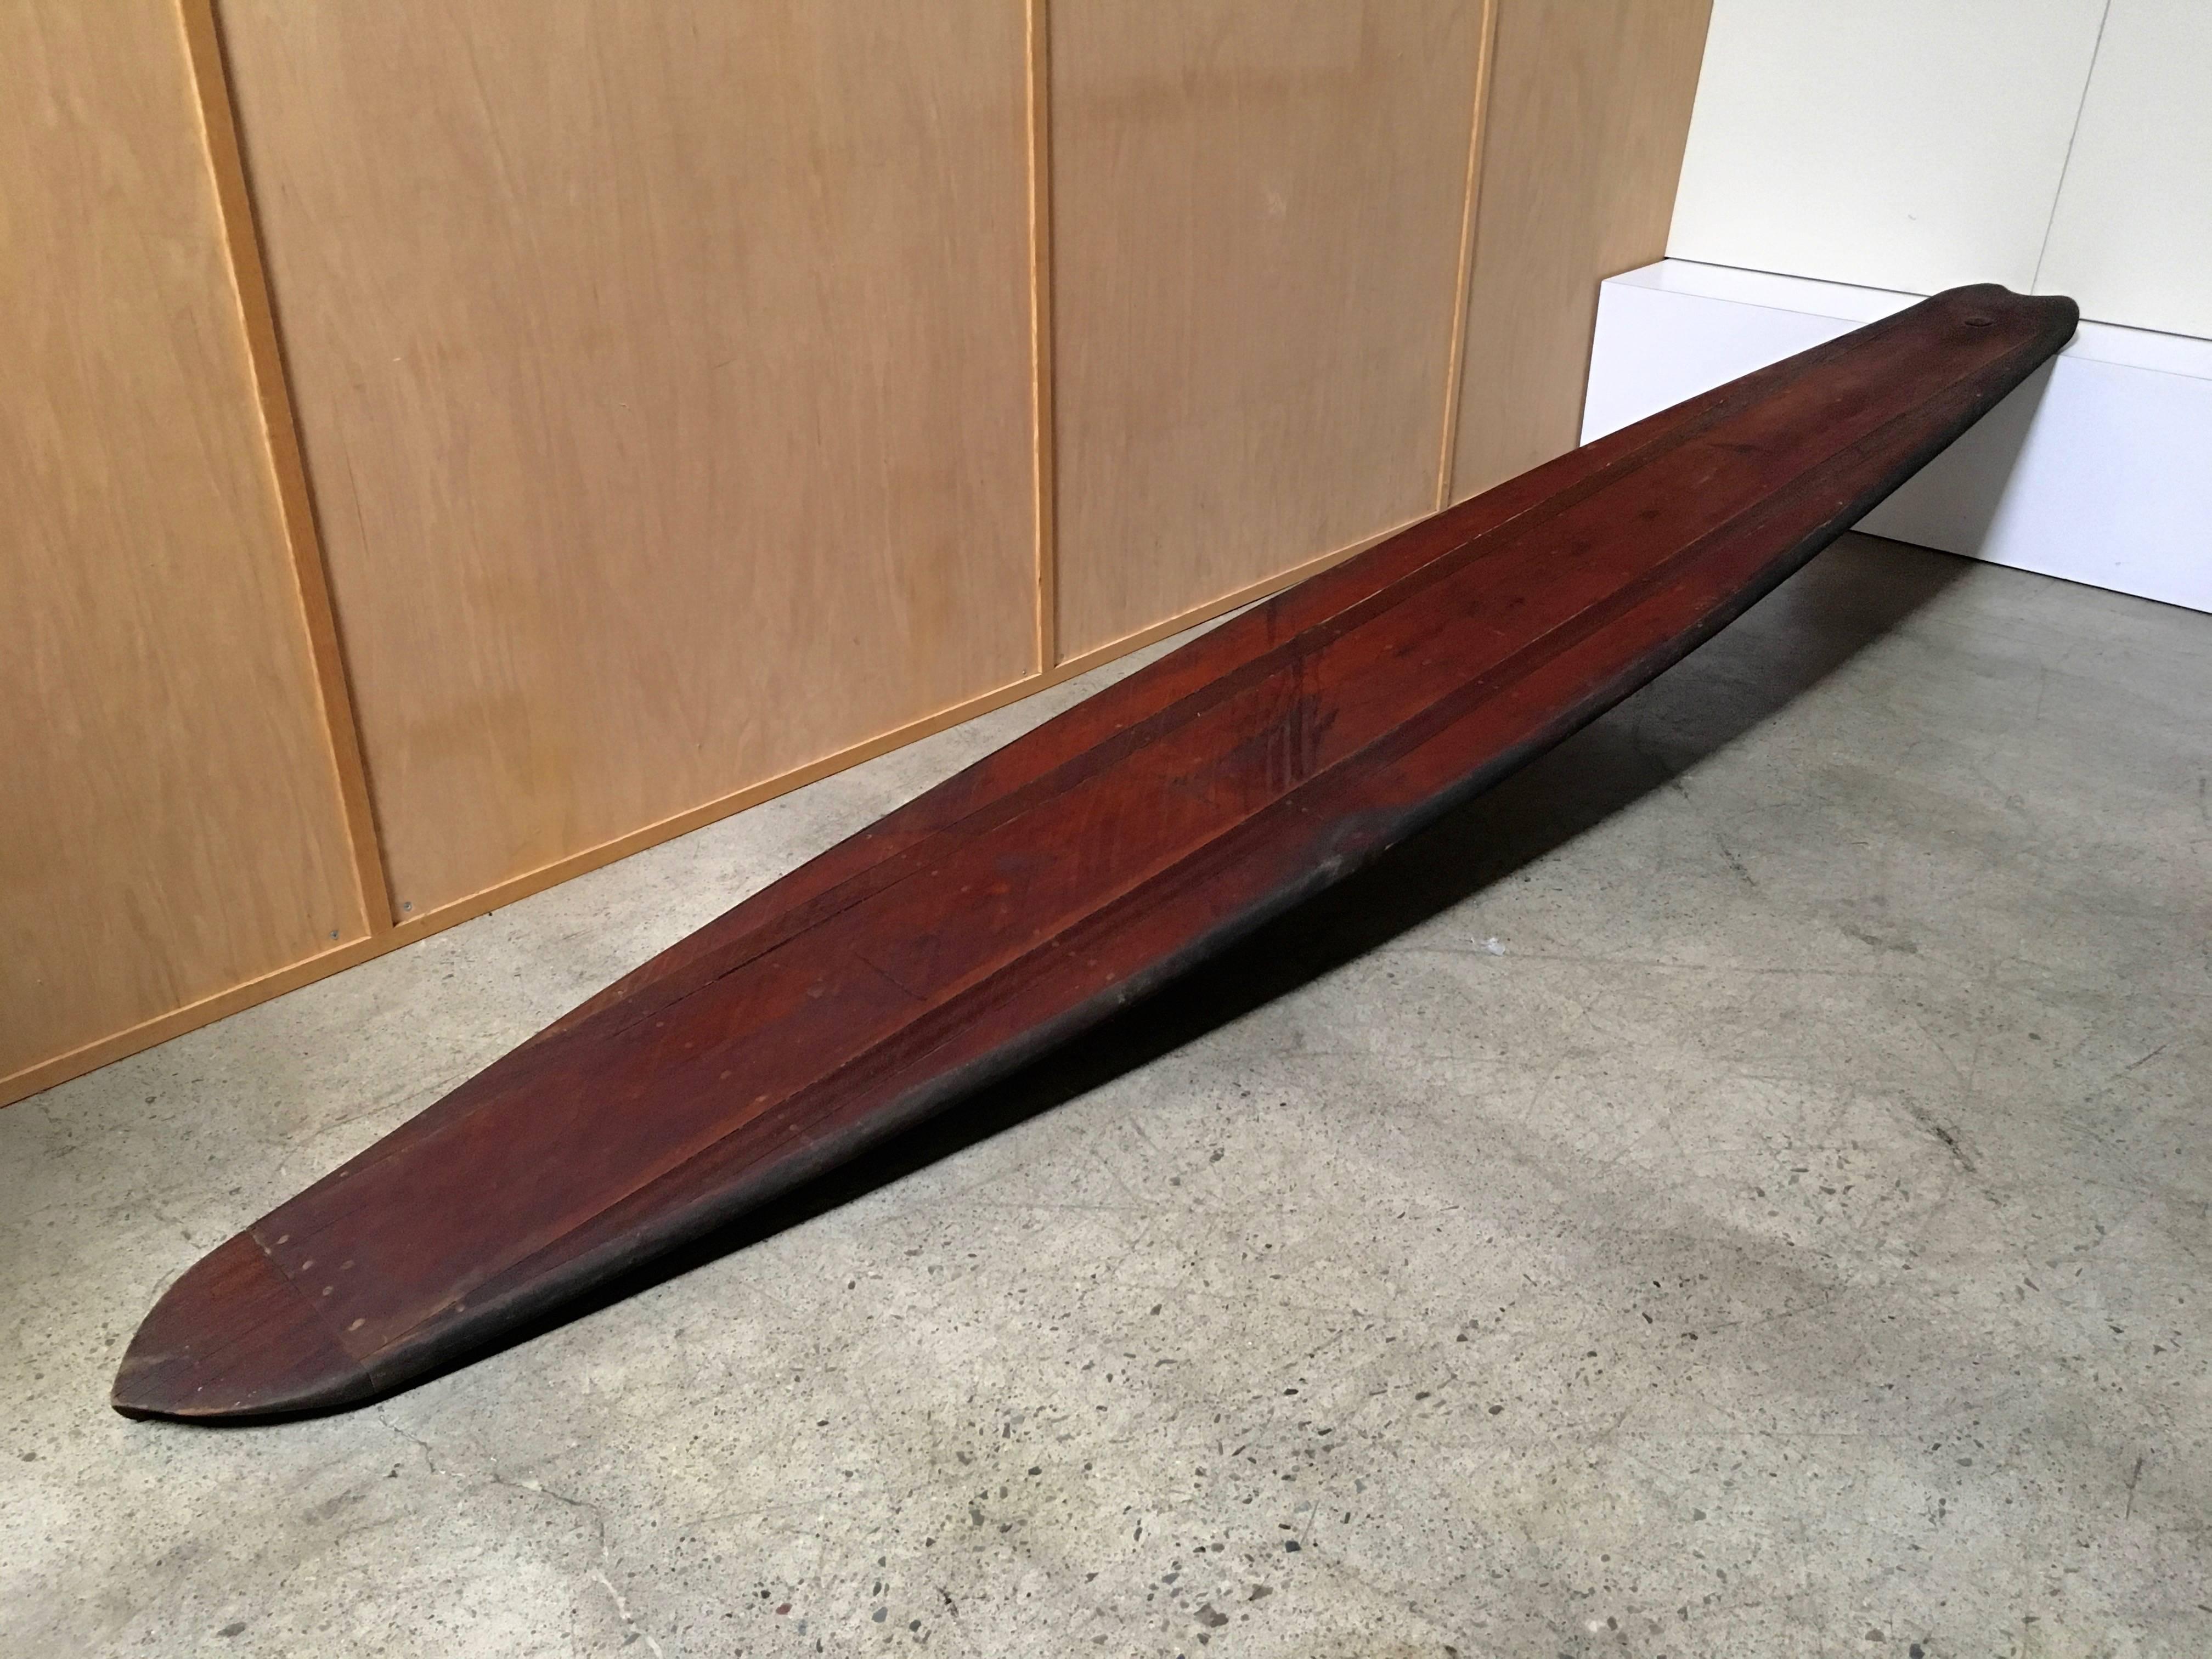 This early paddleboard is a hollow wood board made of Mahogany and redwood with a dove tailed back end.